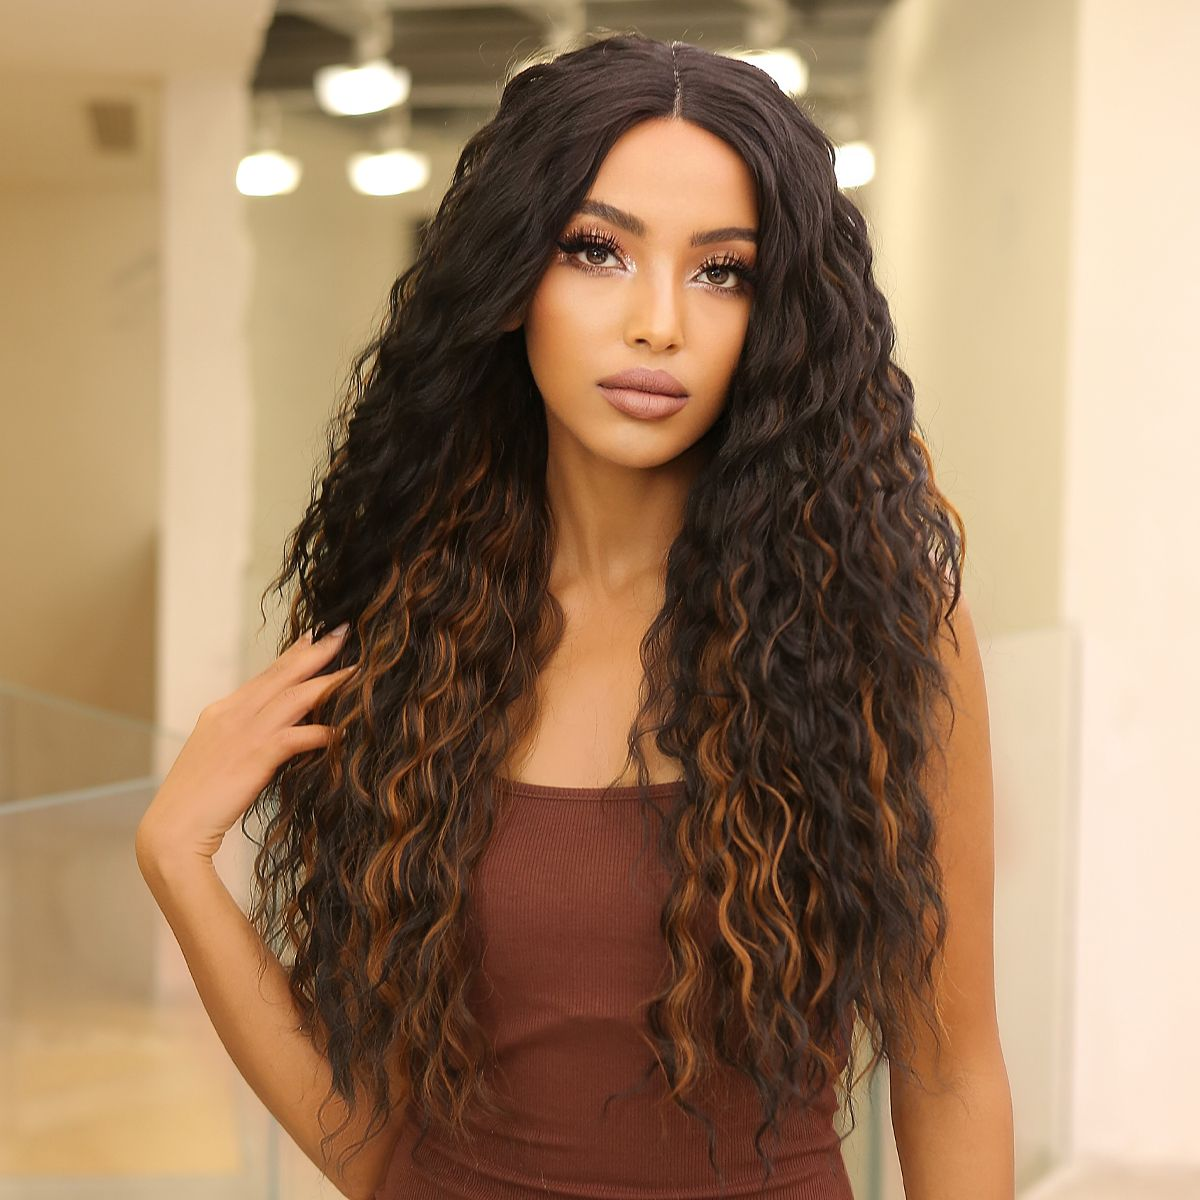 【Sphere 55】28-inch black and lace front wigs Long curly Wavy Wig for Women HC11030-1